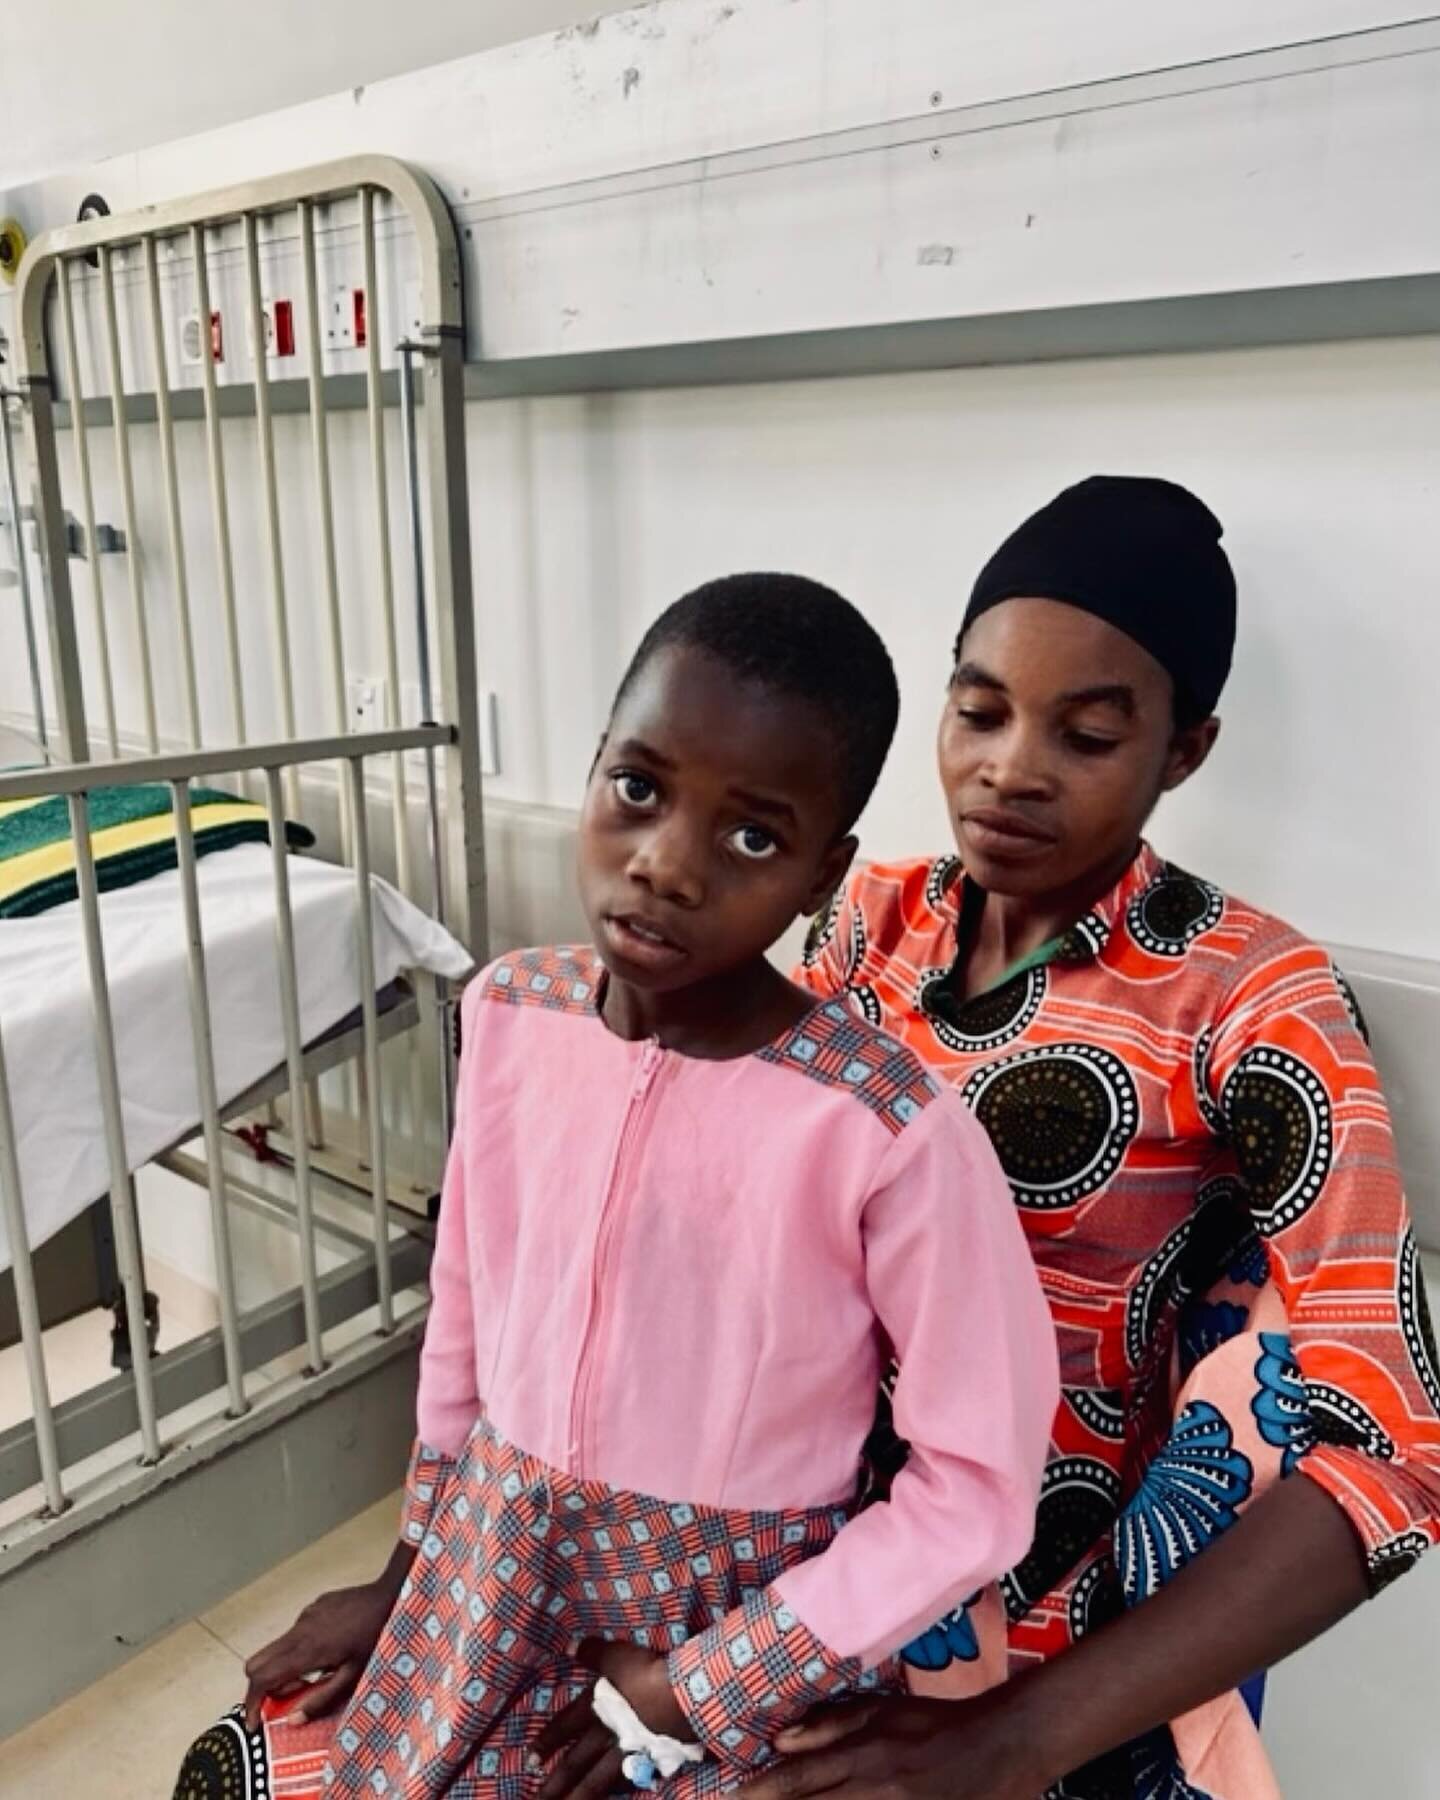 A year ago, Sauda accidentally inhaled a small needle, setting off a year-long struggle with a persistent cough and a difficult journey finding treatment. But now, thanks to the Mercy James Centre and your support, our doctors were able to remove the